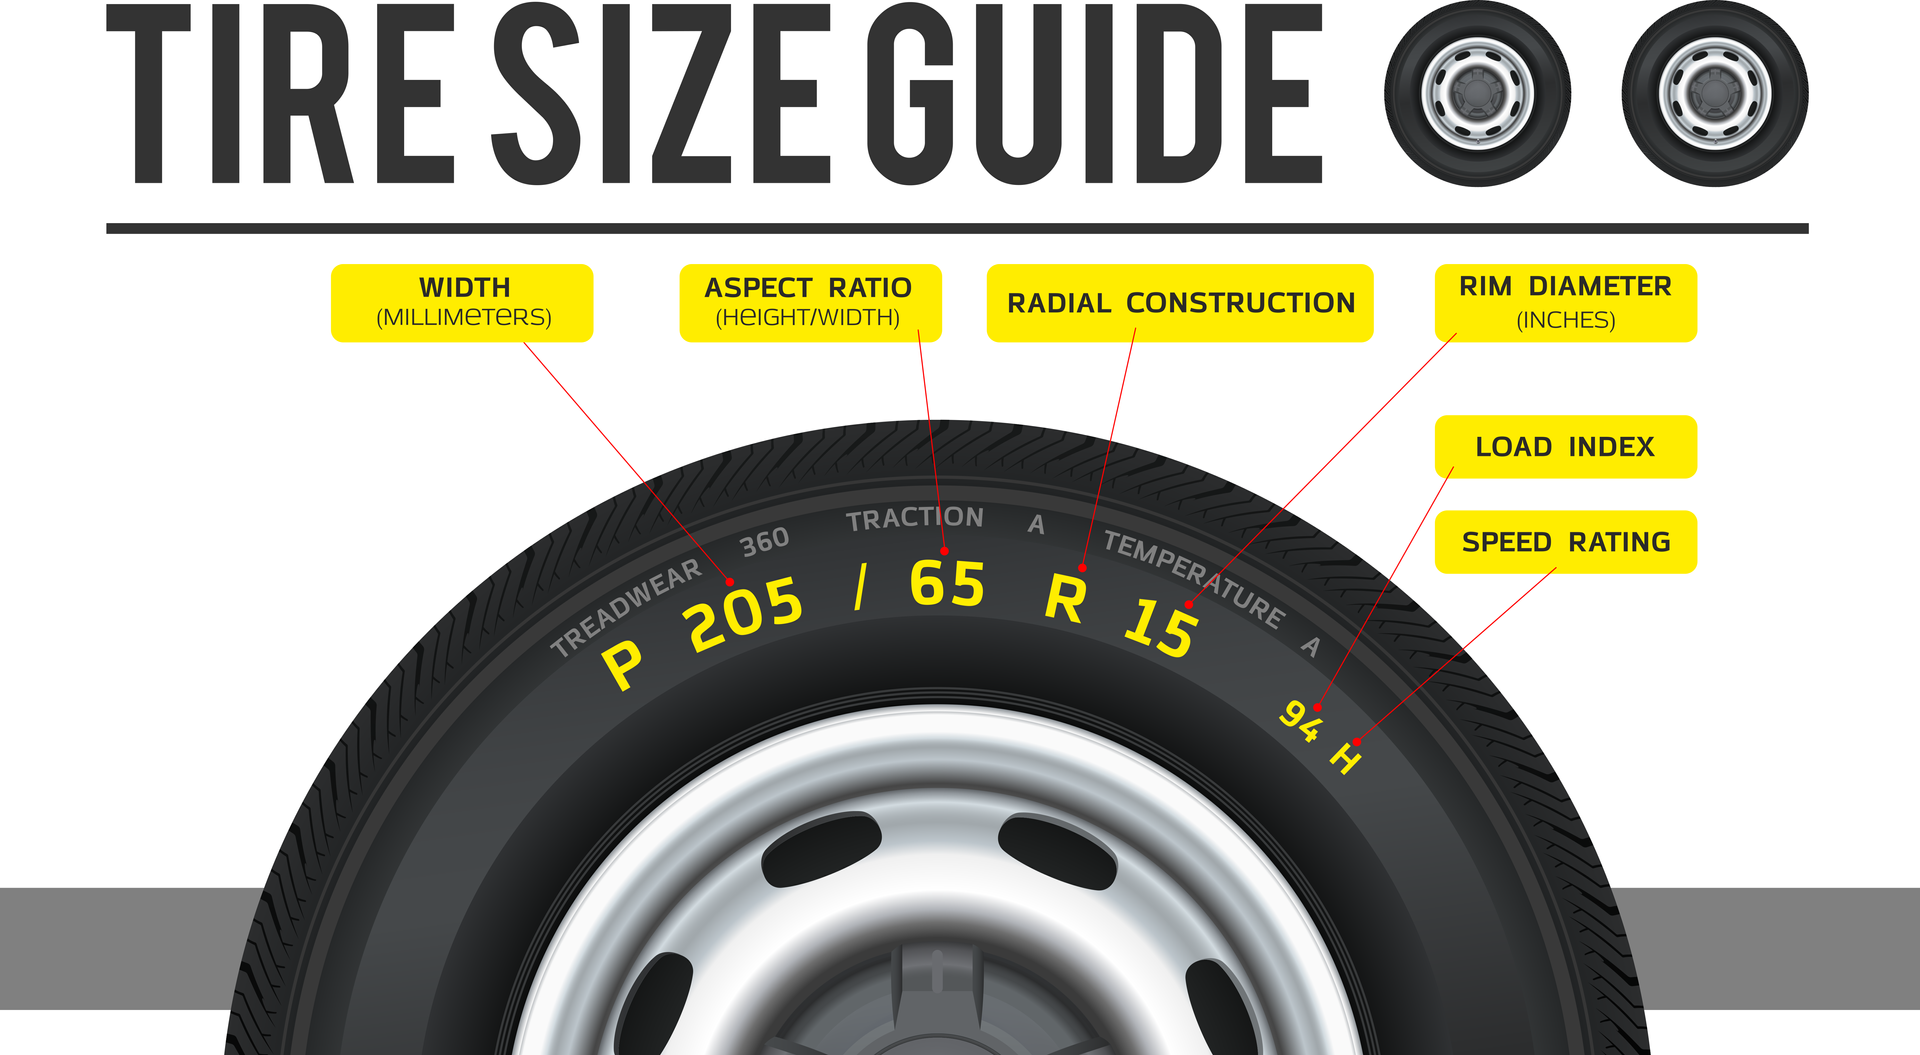 Find your tire size and get a quote for new tires at Automotive Evolution in Denver and Golden, CO